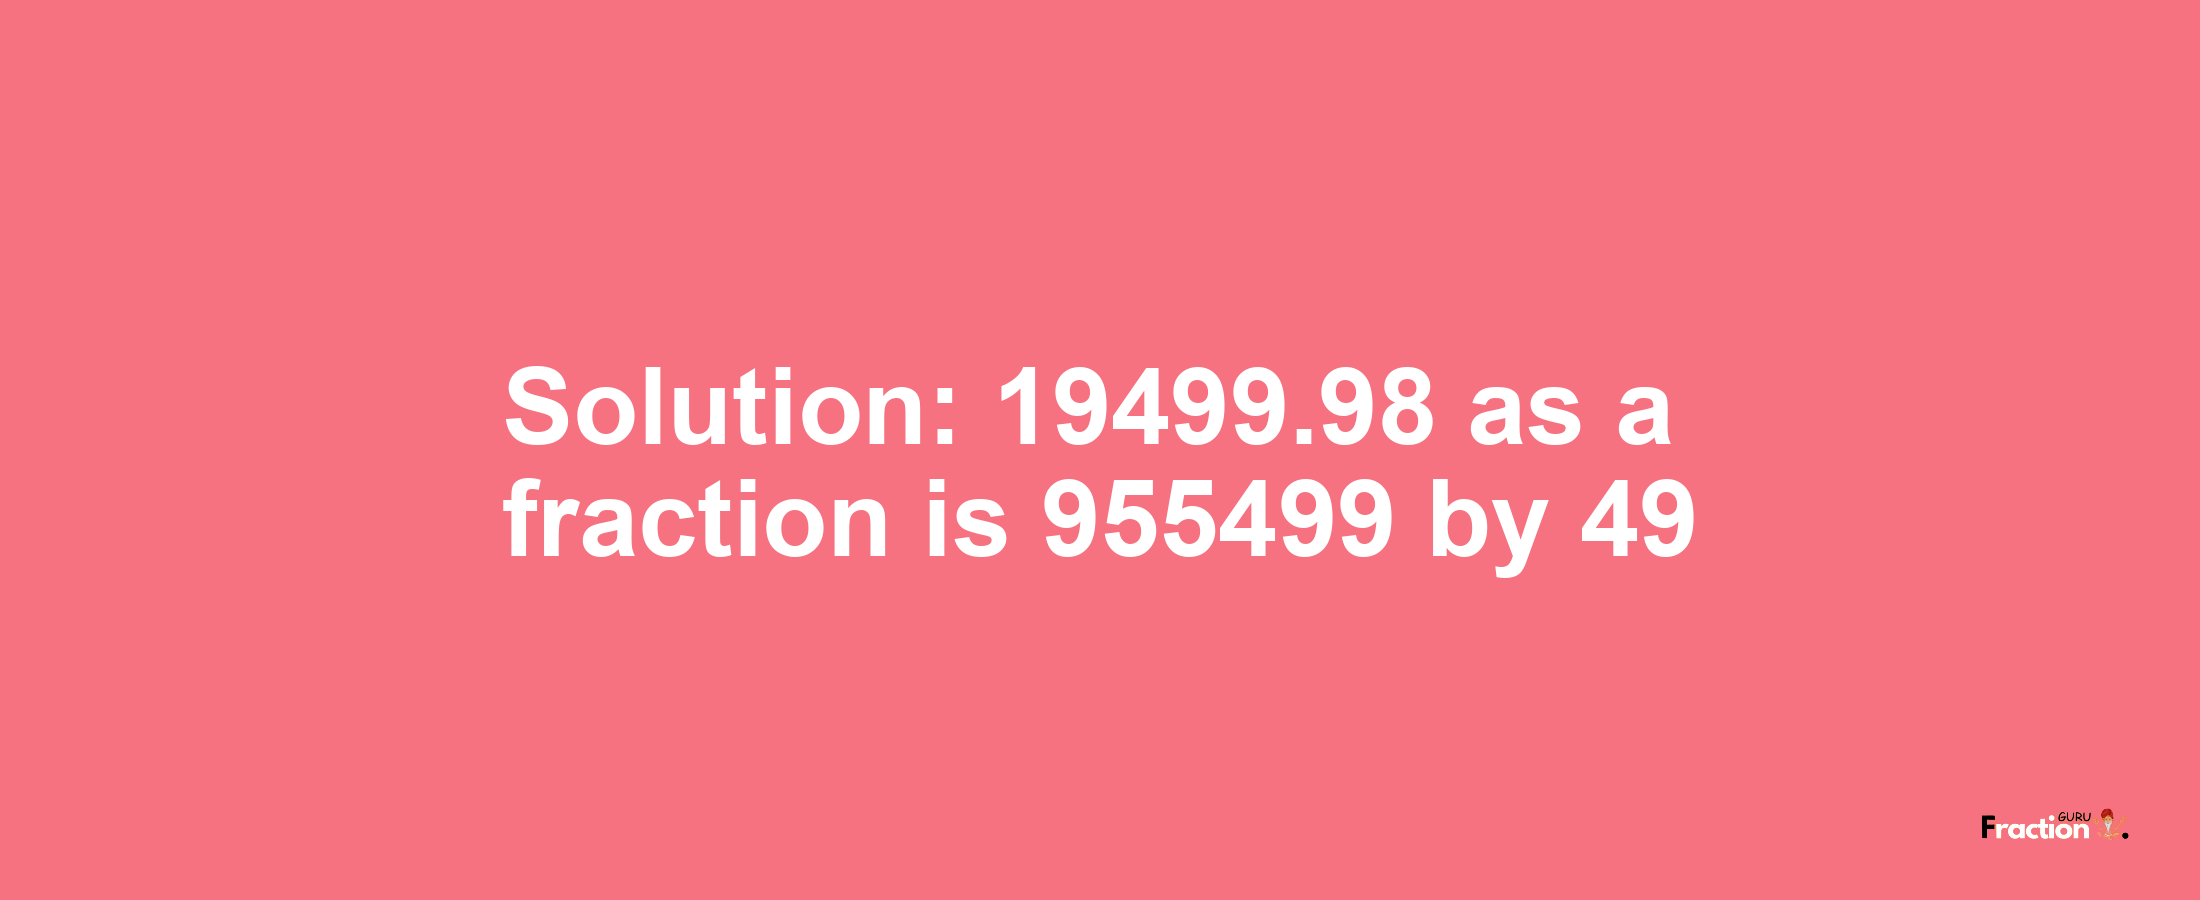 Solution:19499.98 as a fraction is 955499/49